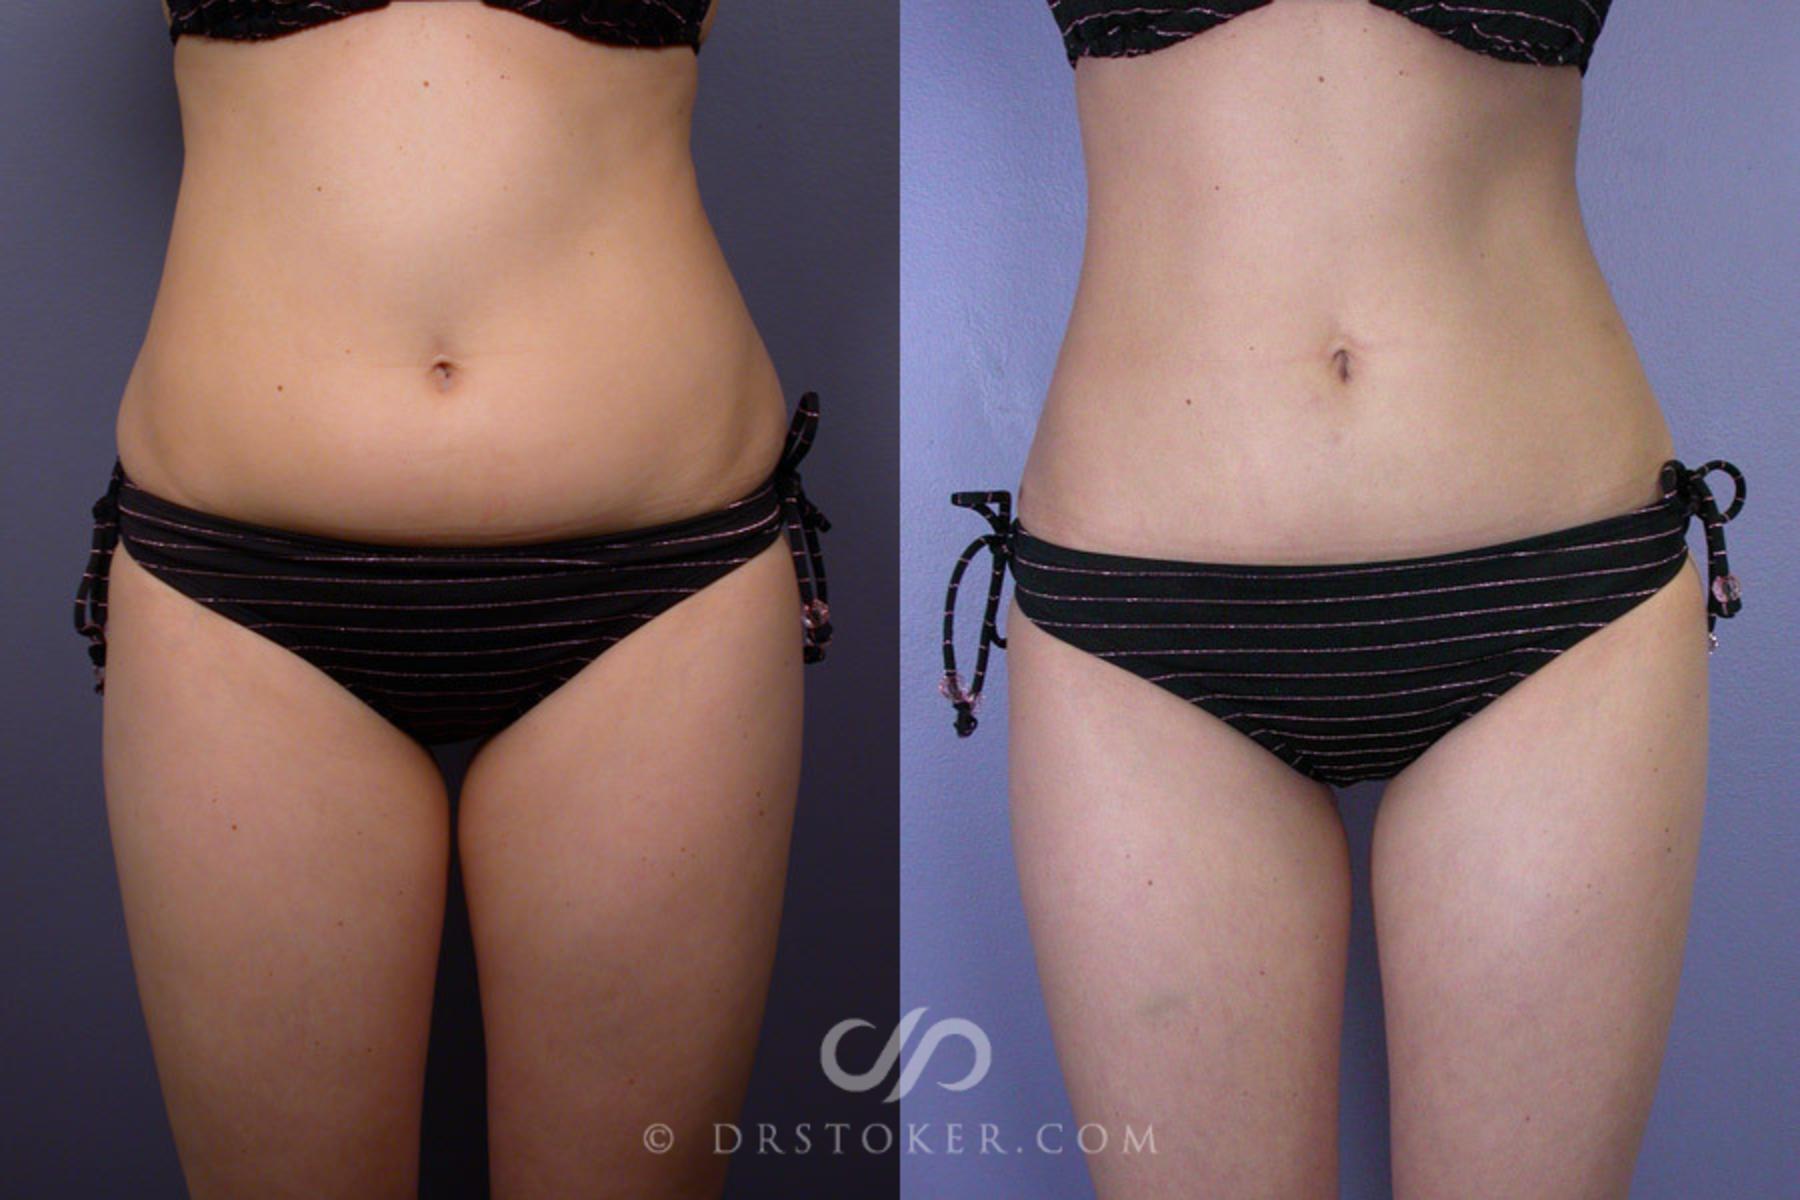 Abdomen Lipo Before and After Photo Gallery, Page 6 of 6